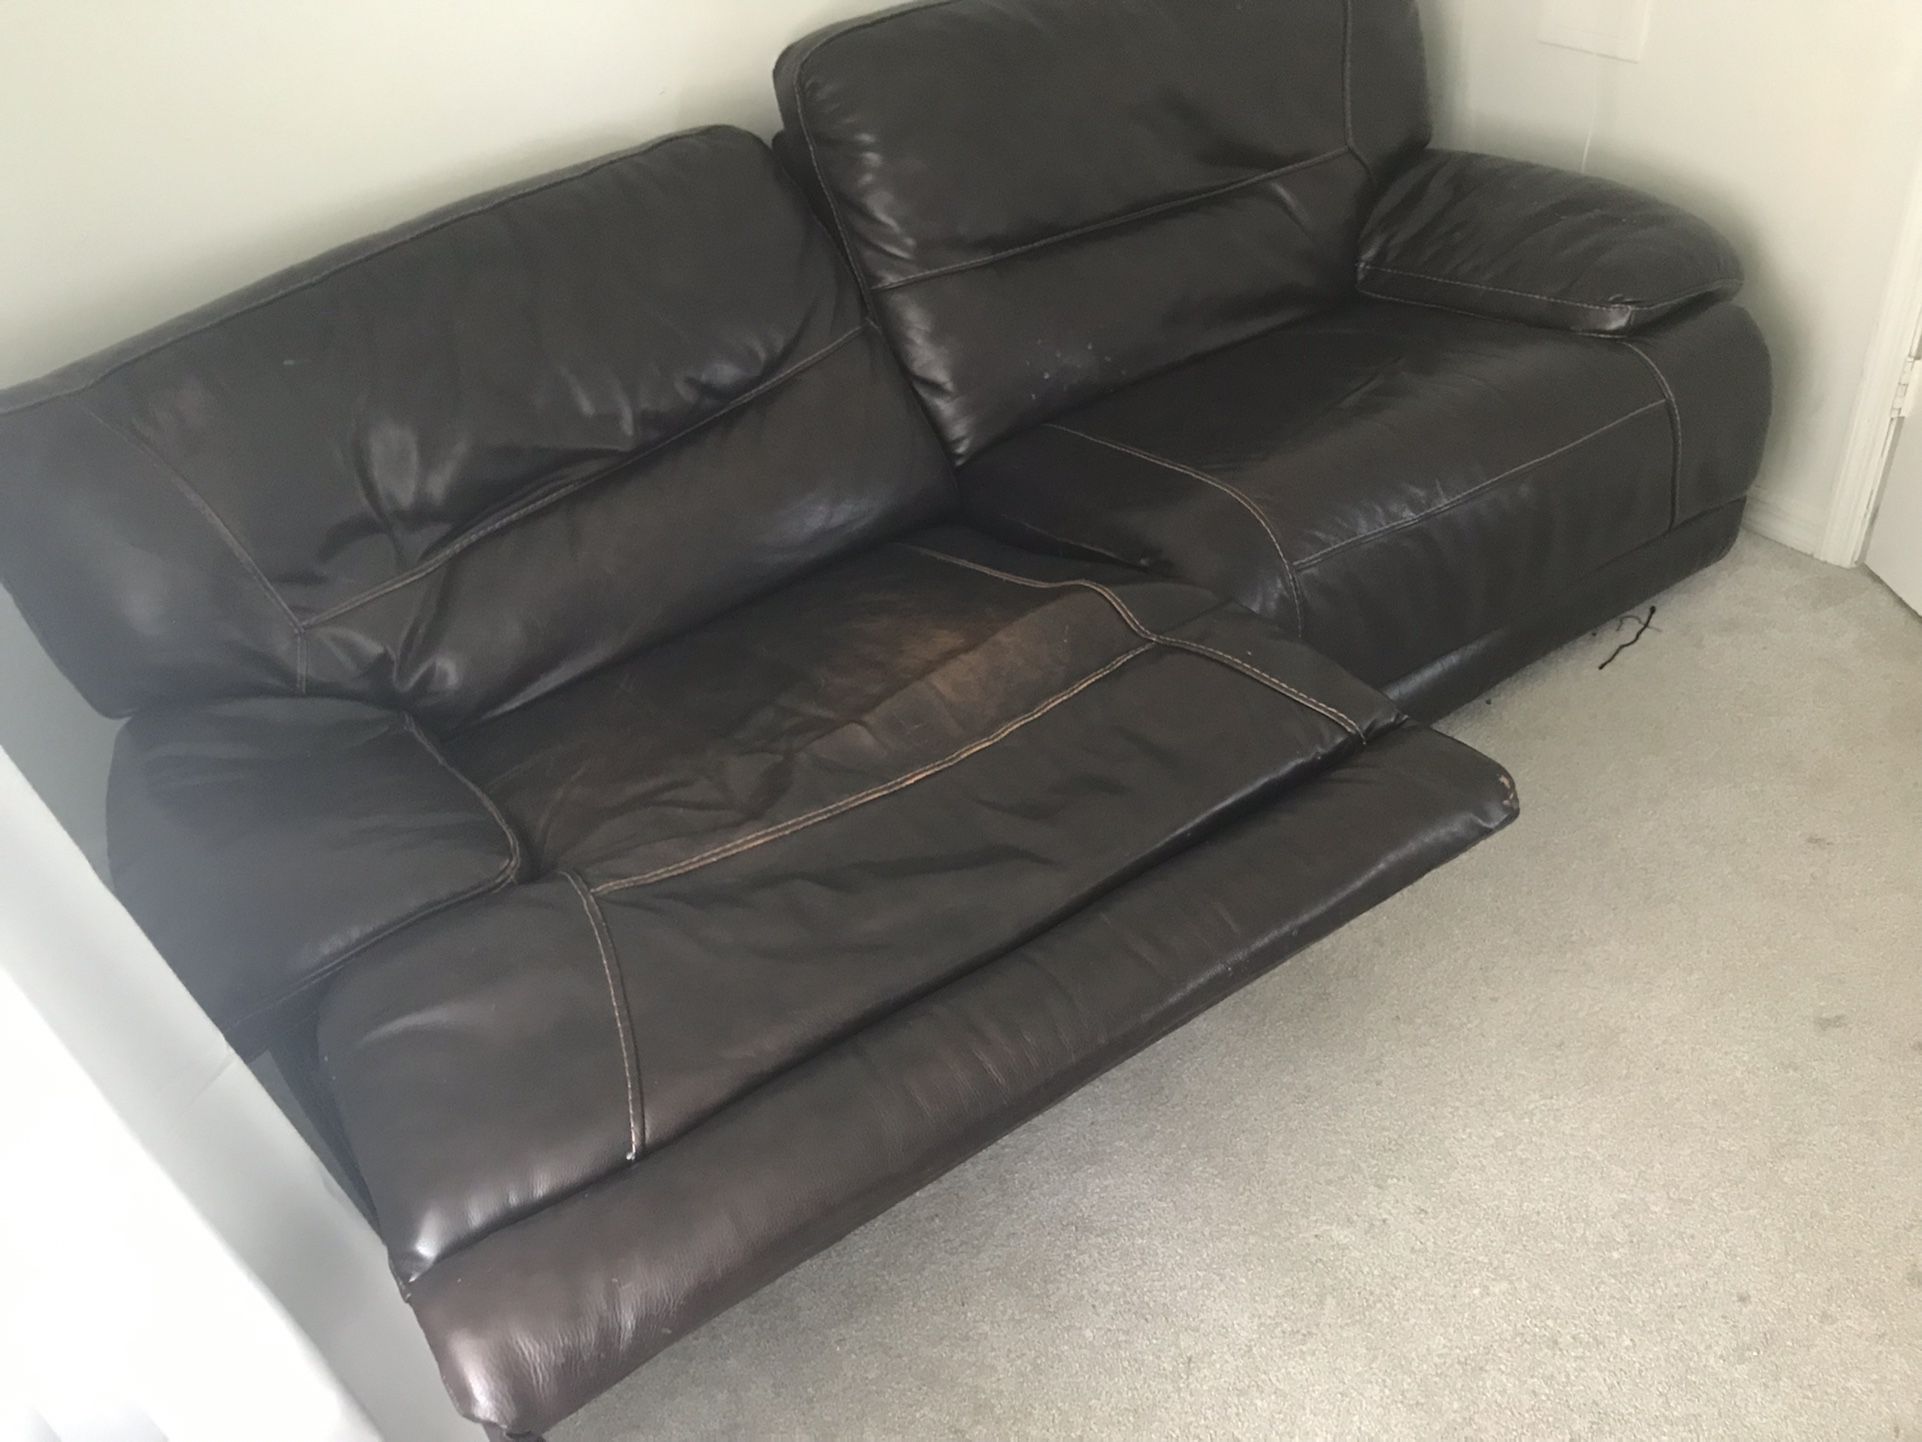 Leather Reclining Couch Clean N Comfy